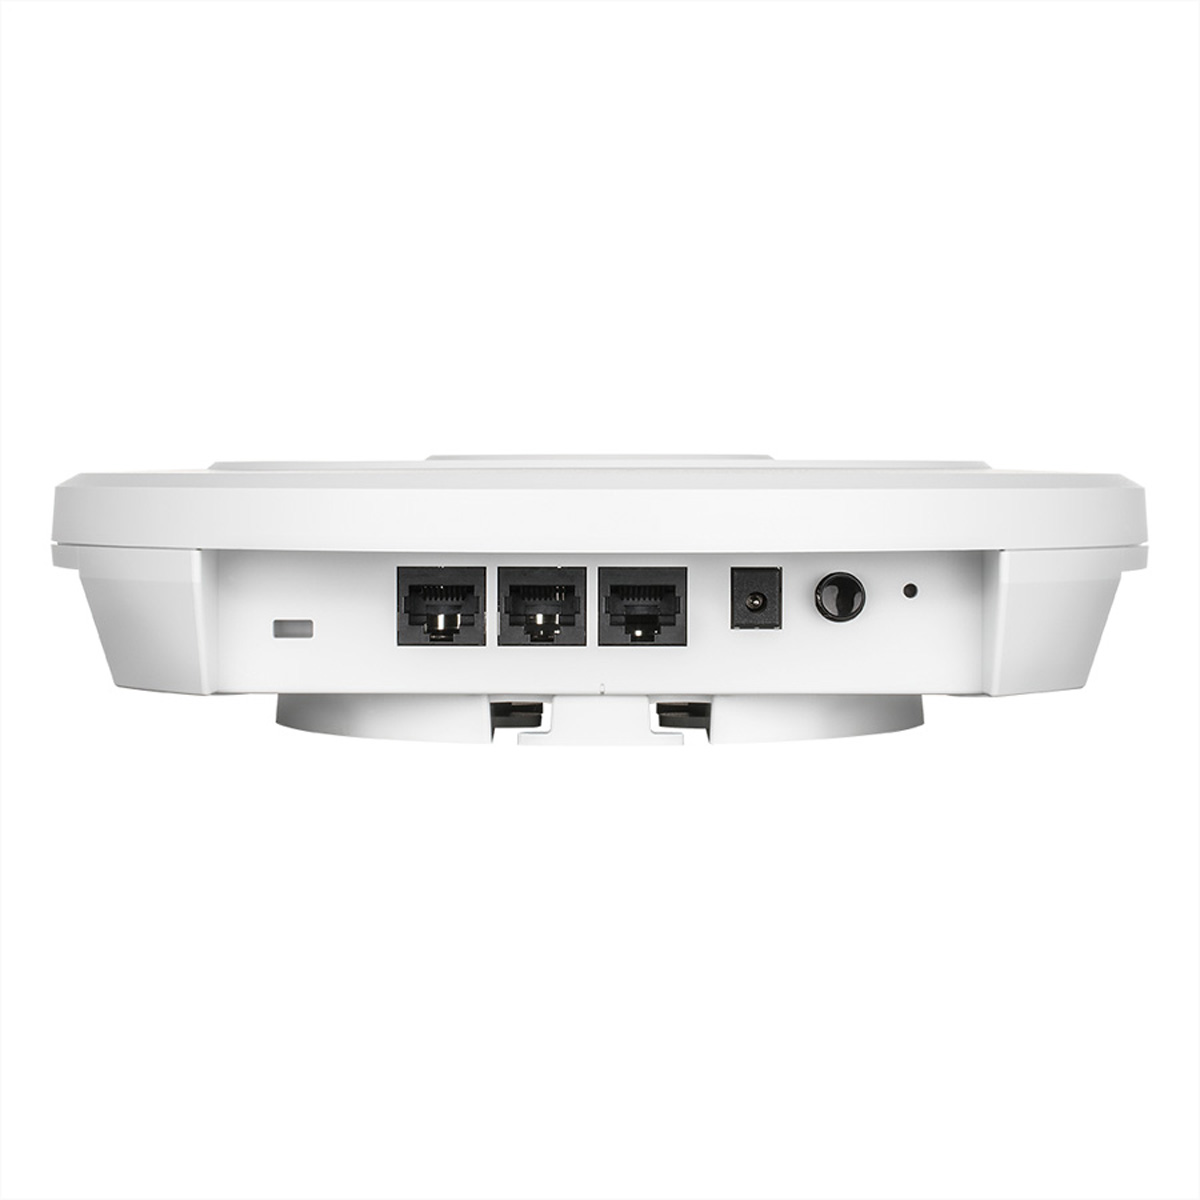 Wireless Point DWL-7620AP Tri-Band Gbit/s Wave2 Access LAN AC2200 Unified D-LINK 2,2